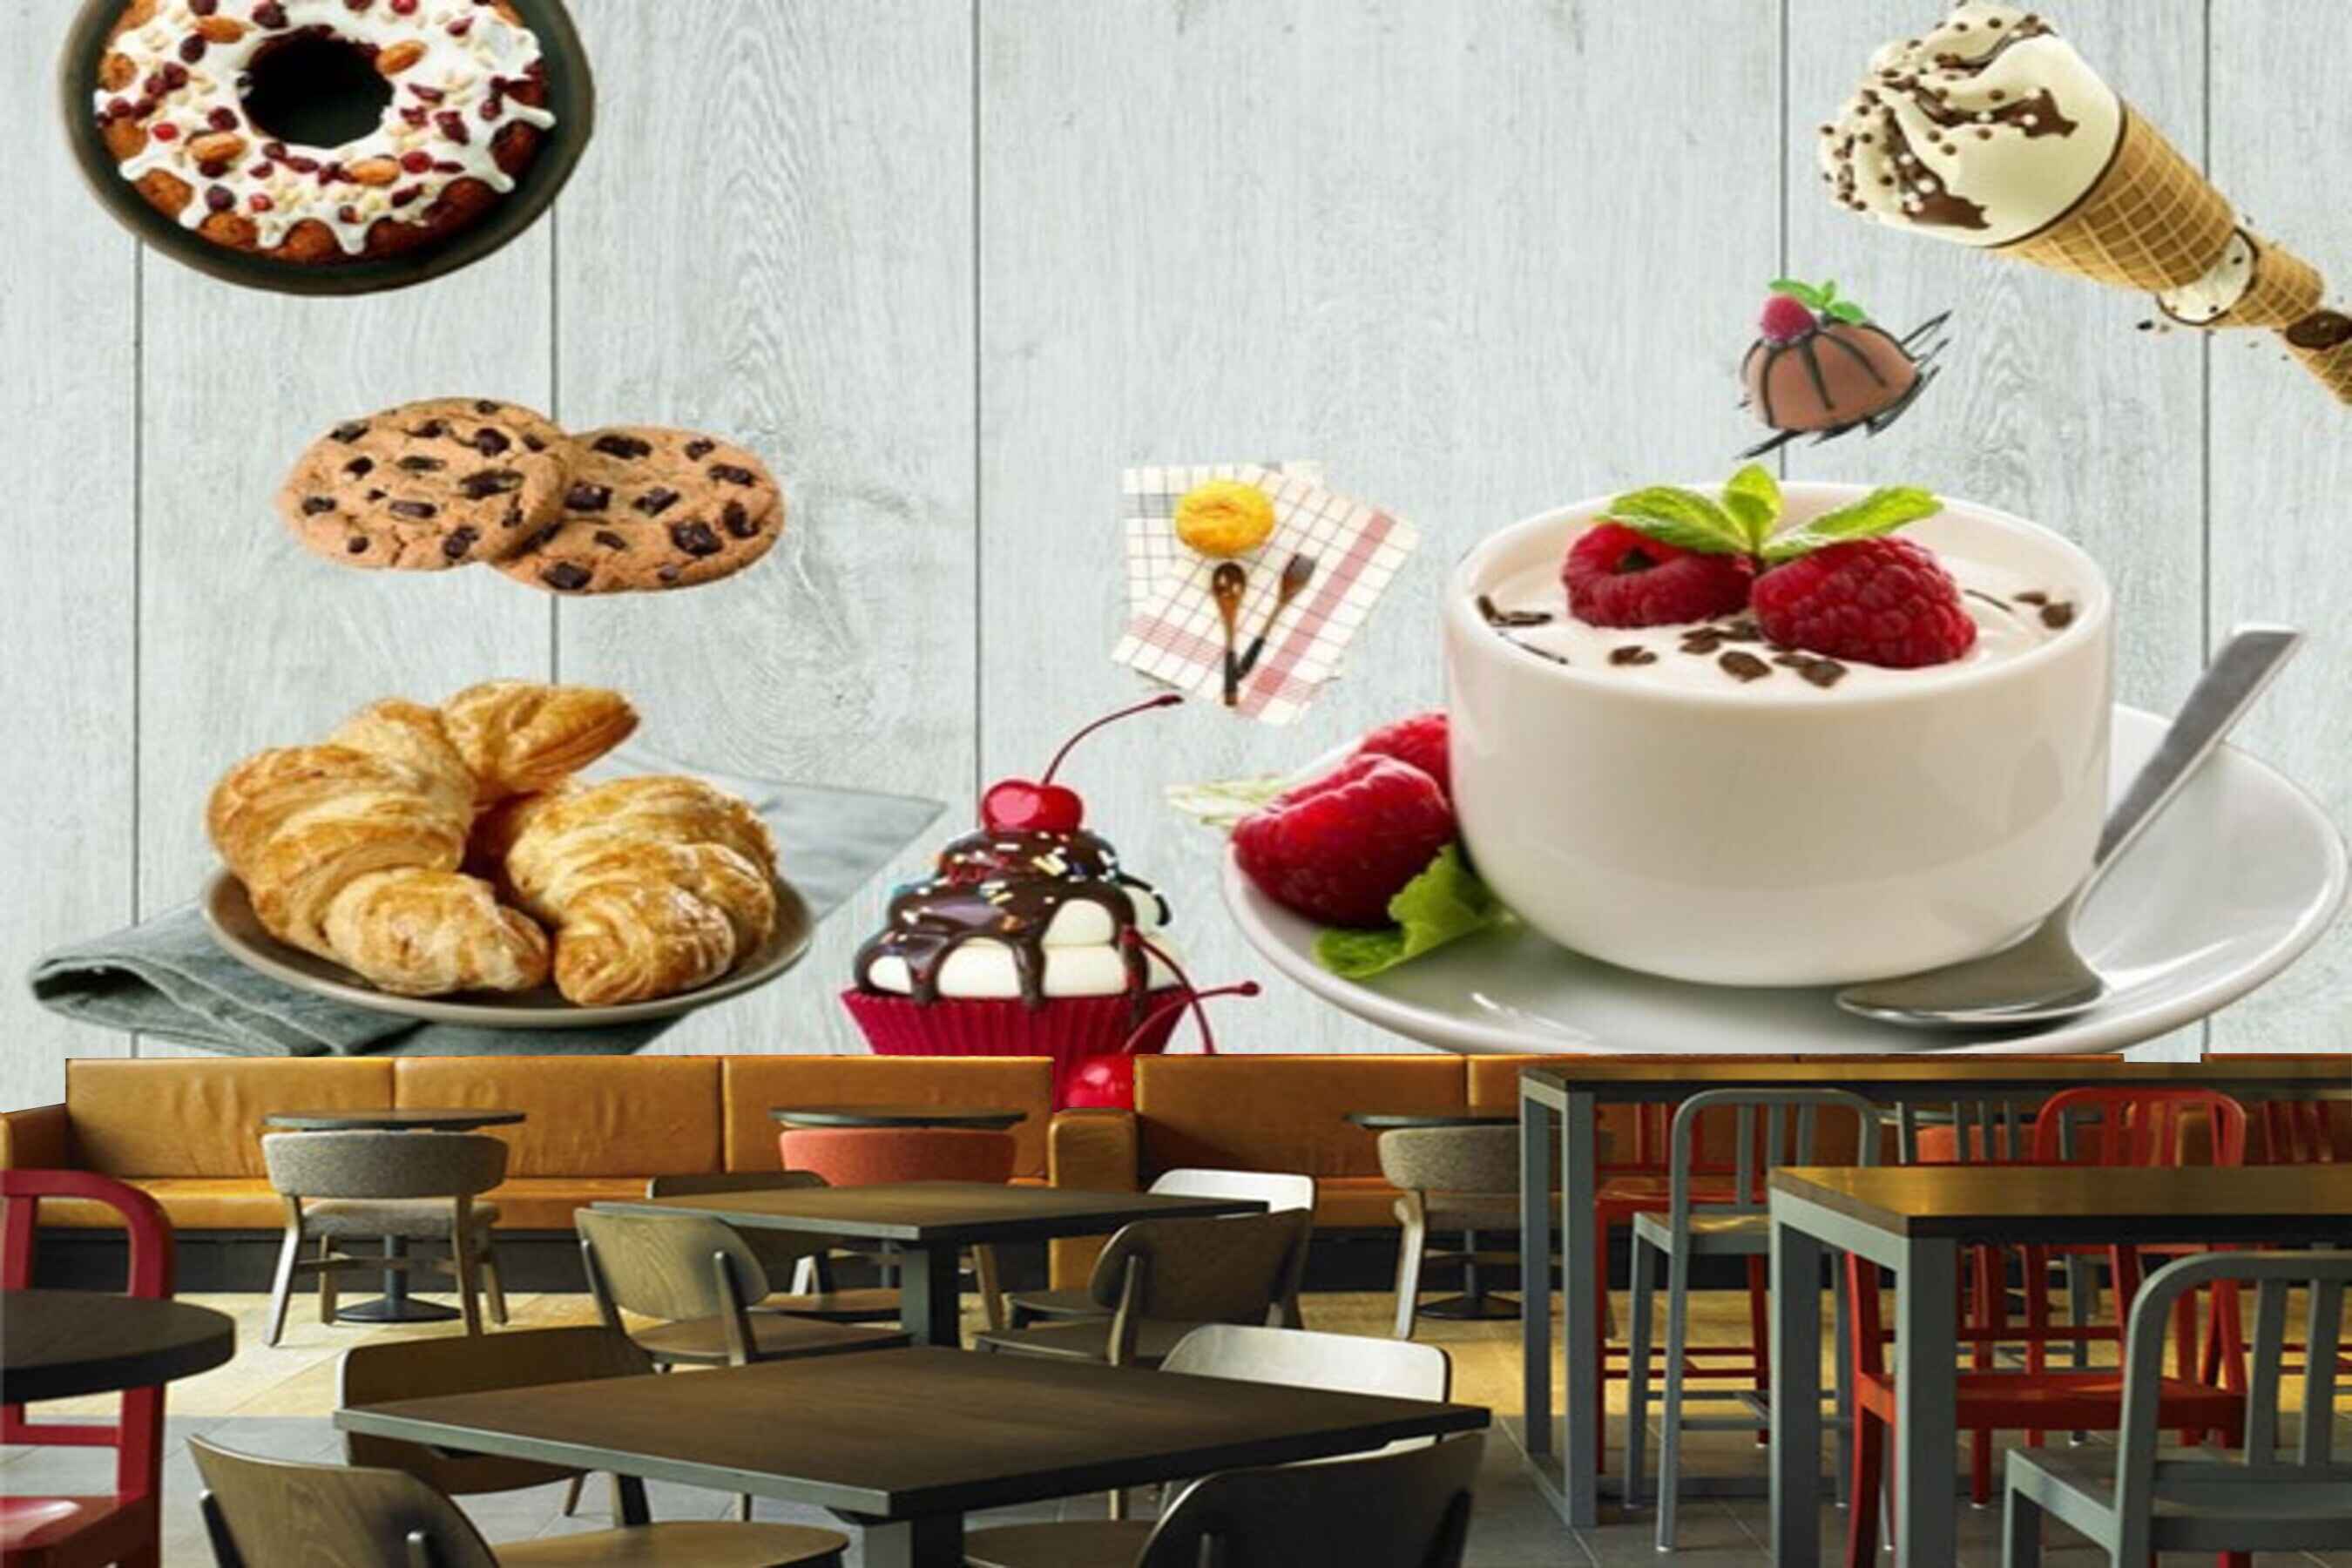 Avikalp MWZ3082 Biscuits Cup Cake Donuts Icecreams Cherries HD Wallpaper for Cafe Restaurant